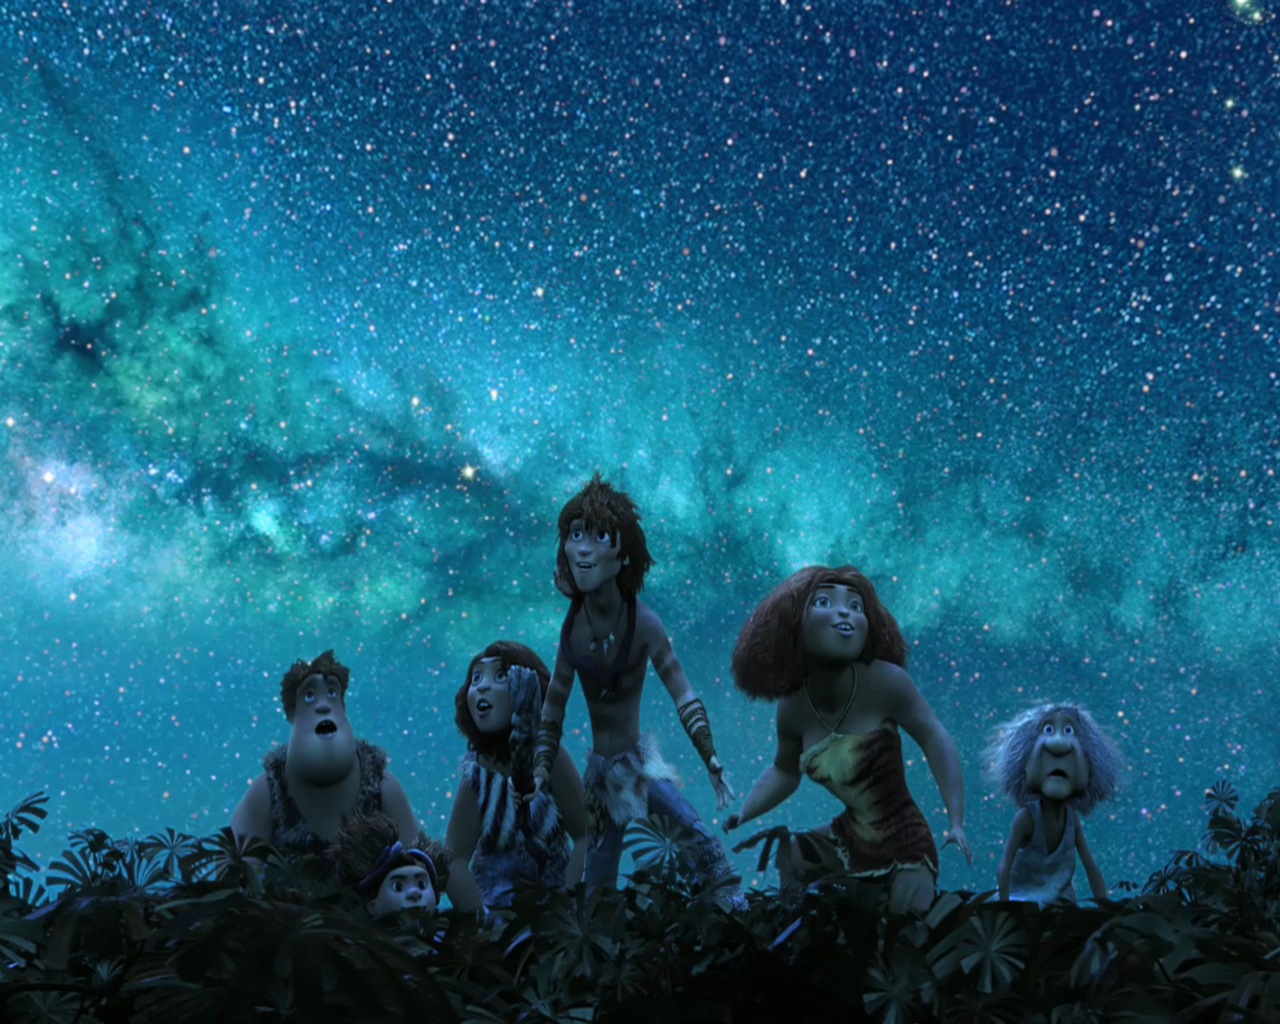 The Croods HD movie wallpapers #16 - 1280x1024